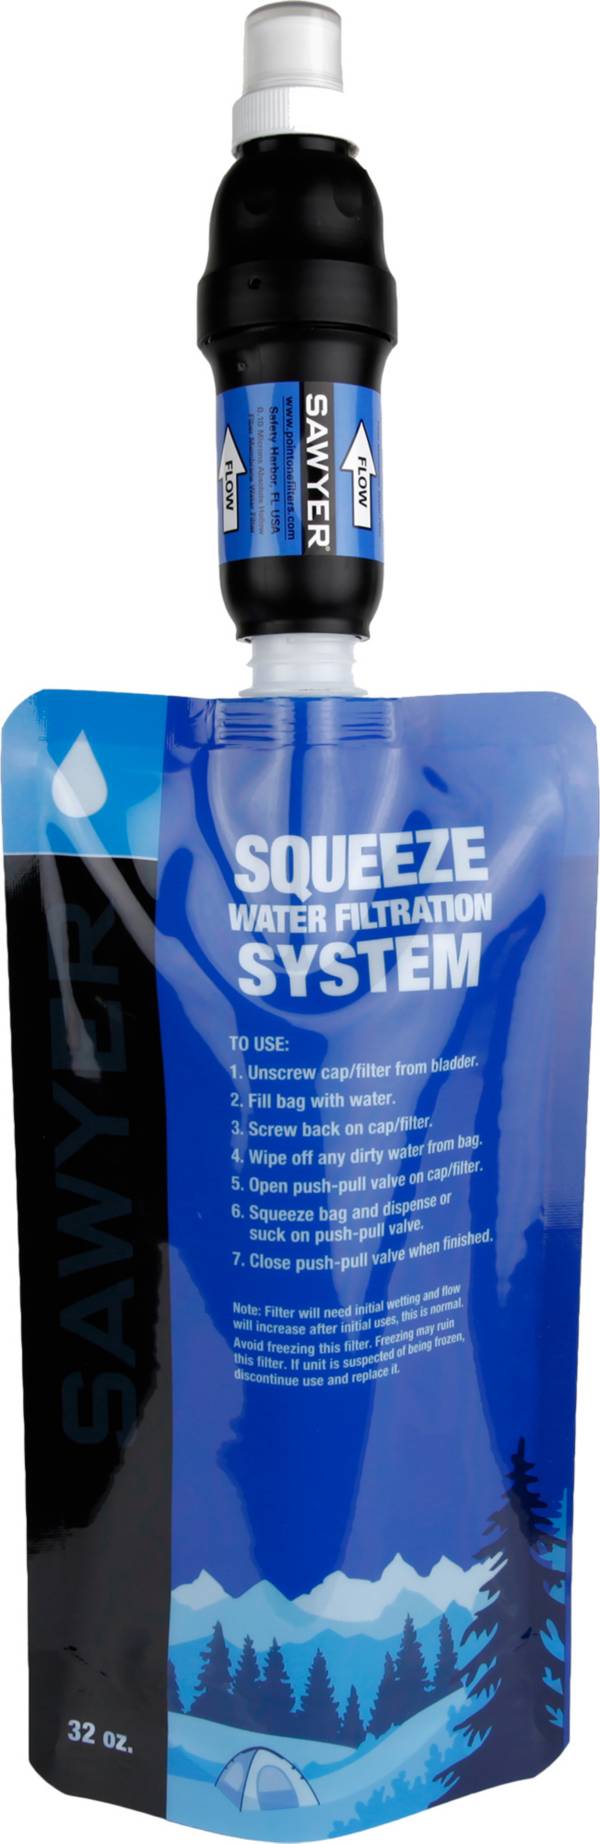 Sawyer 32 fl. oz. Water Squeeze Filter product image